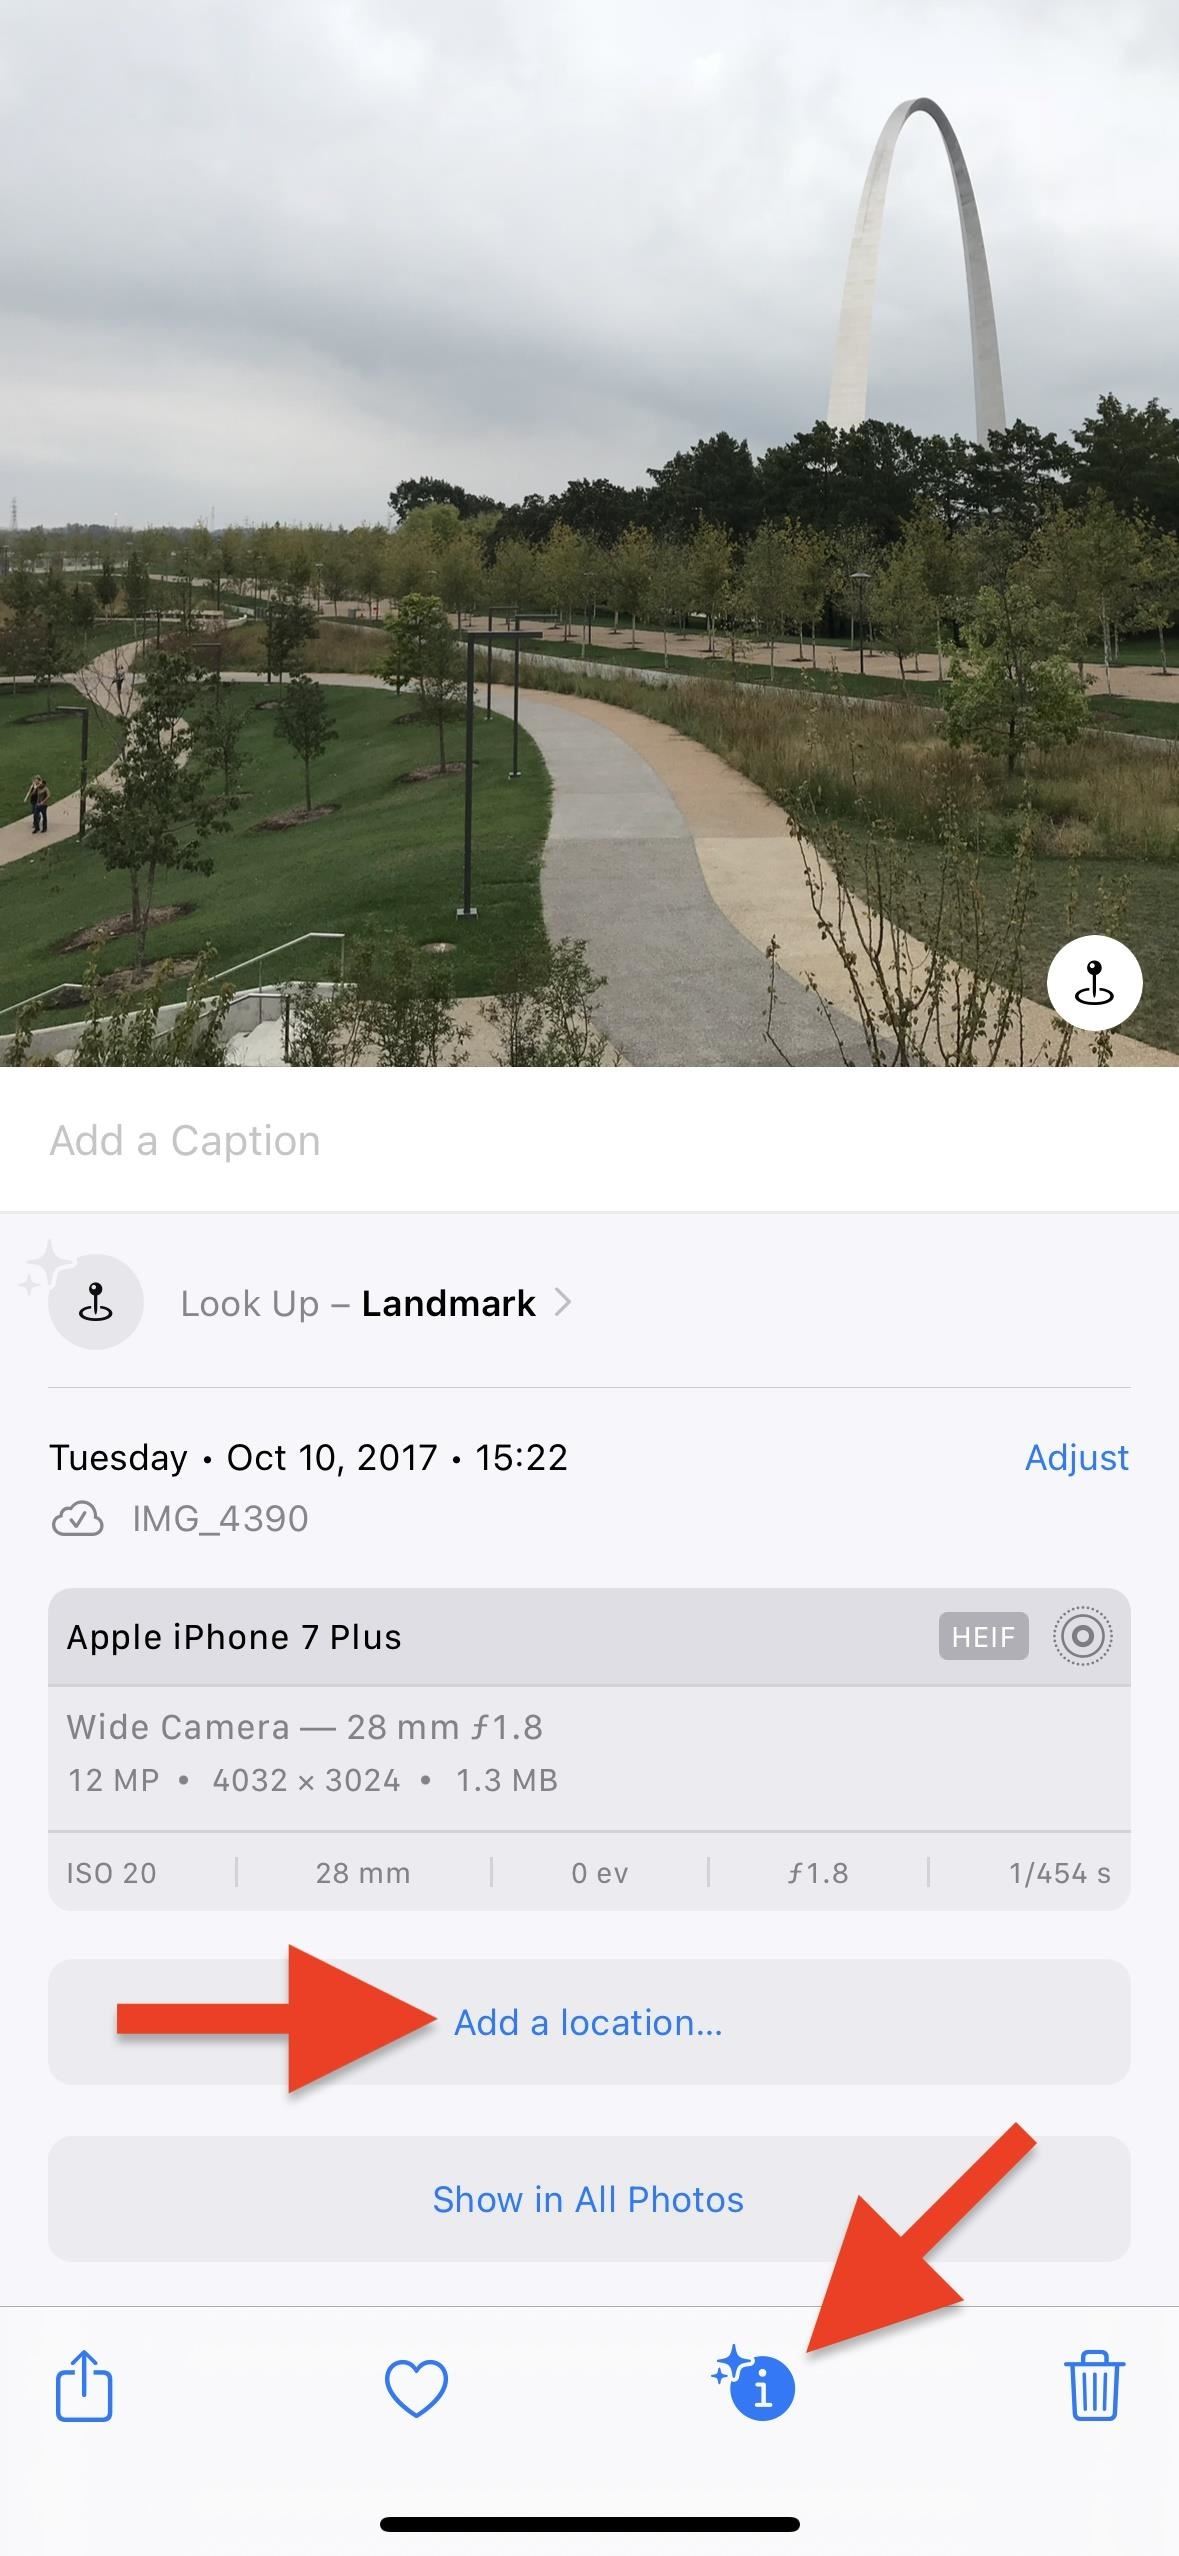 It's easy to fake geotagging photos on your iPhone to keep real locations secret